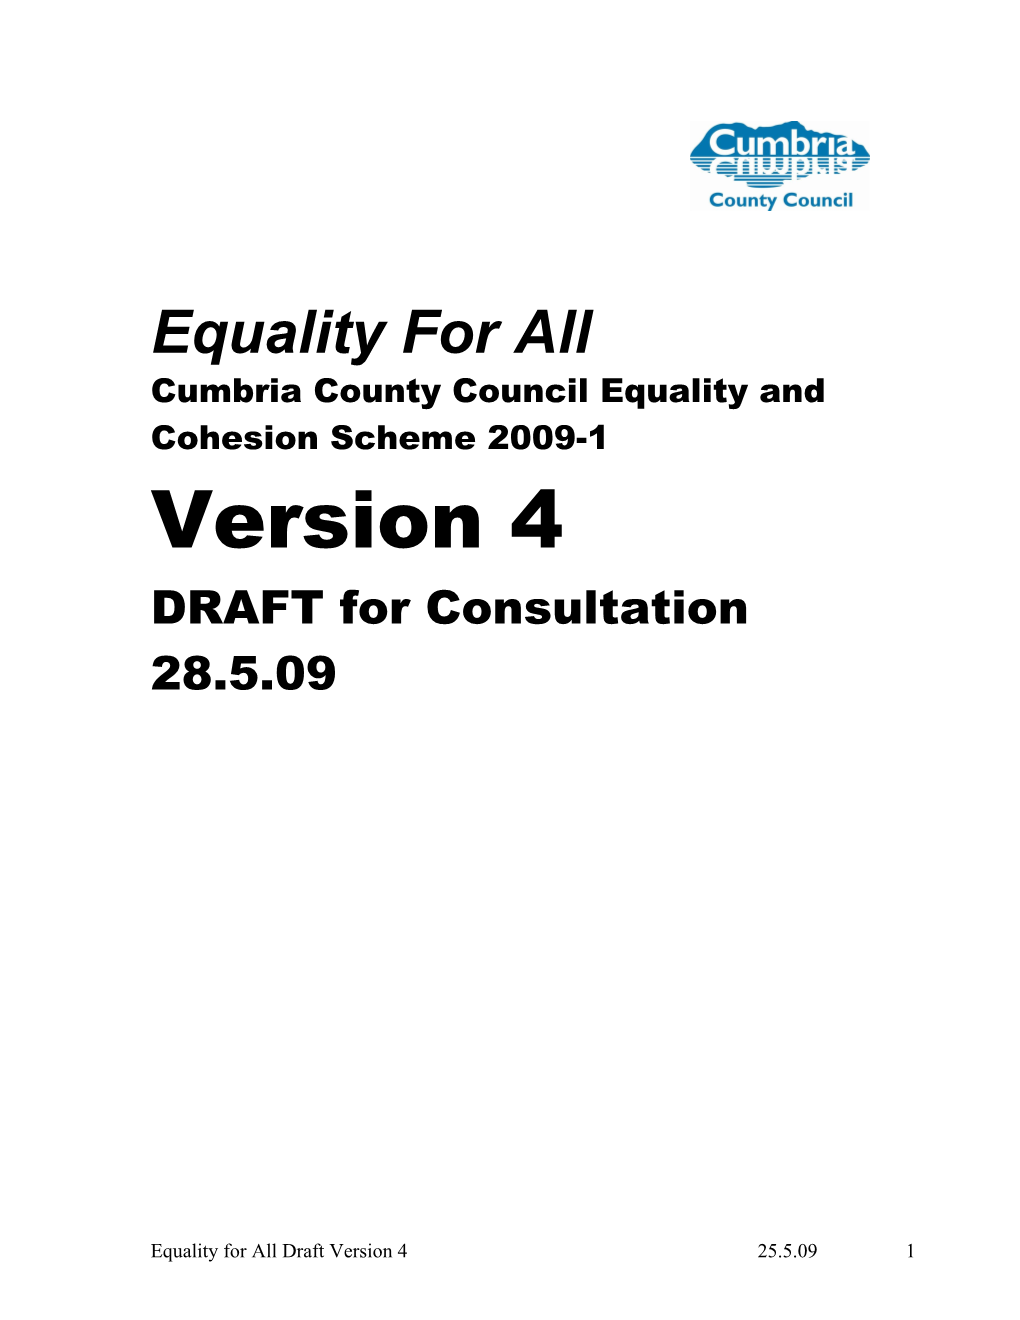 Cumbria County Council Equality and Cohesion Scheme 2009-1